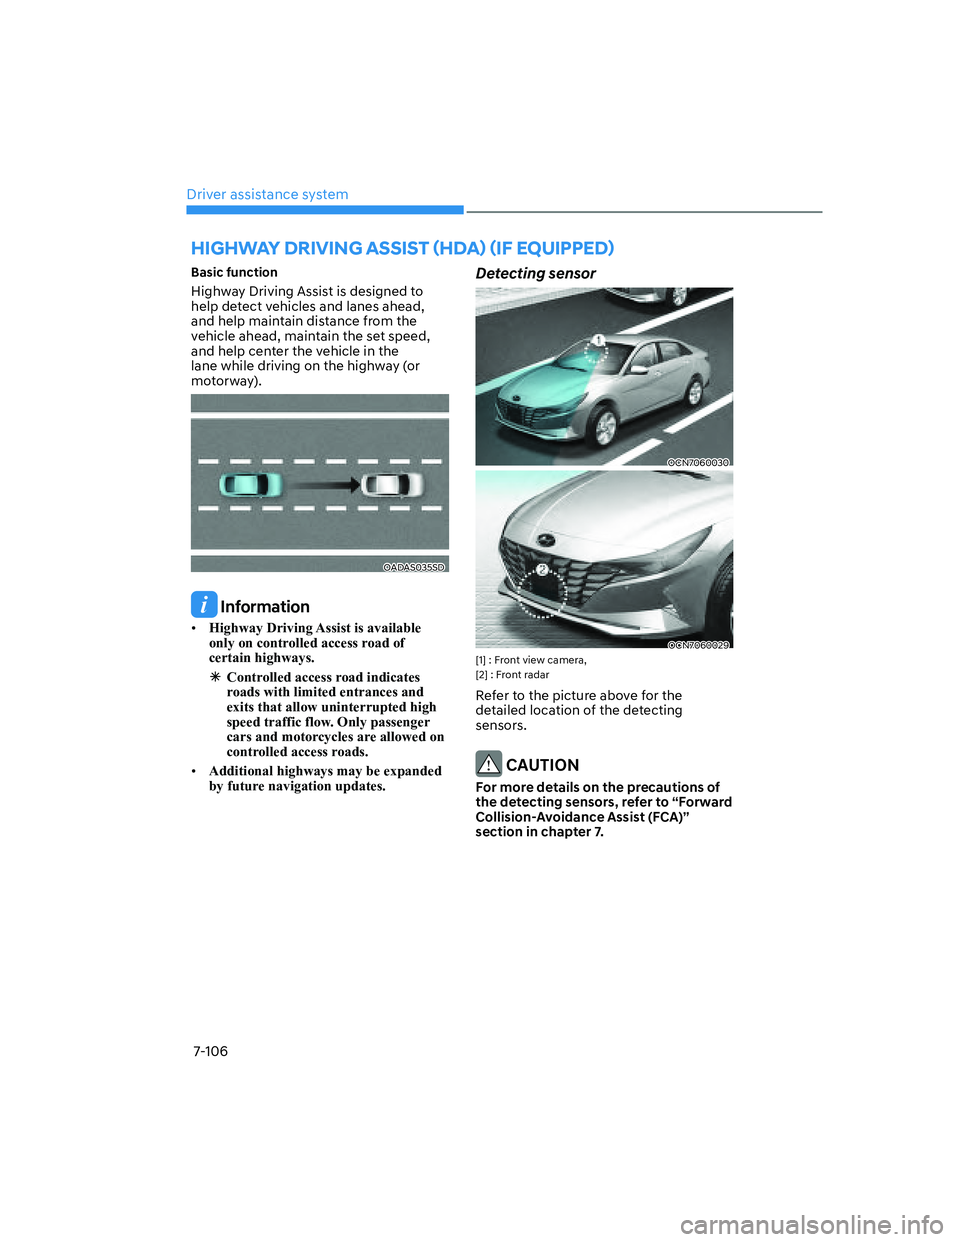 HYUNDAI ELANTRA 2022  Owners Manual Driver assistance system
7-106
Basic function
Highway Driving Assist is designed to 
help detect vehicles and lanes ahead, 
and help maintain distance from the 
vehicle ahead, maintain the set speed, 